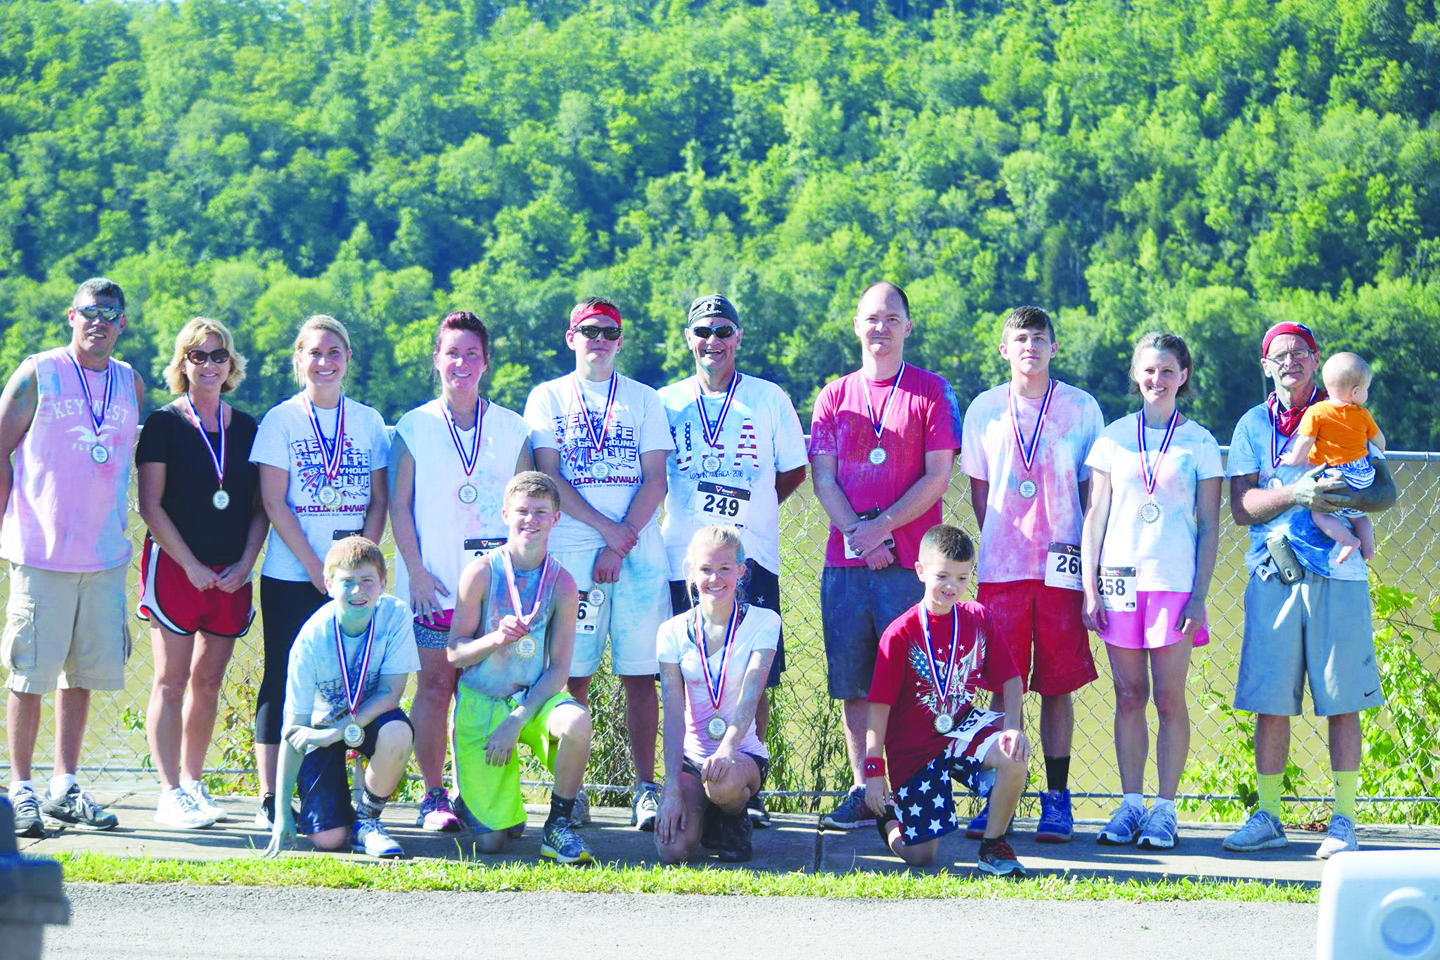 Pictured are the age group winners in the “Red, White, and Greyhound Blue” 5K Run/Walk held on Saturday, July 2 and organized by the Manchester High School Volleyball program.